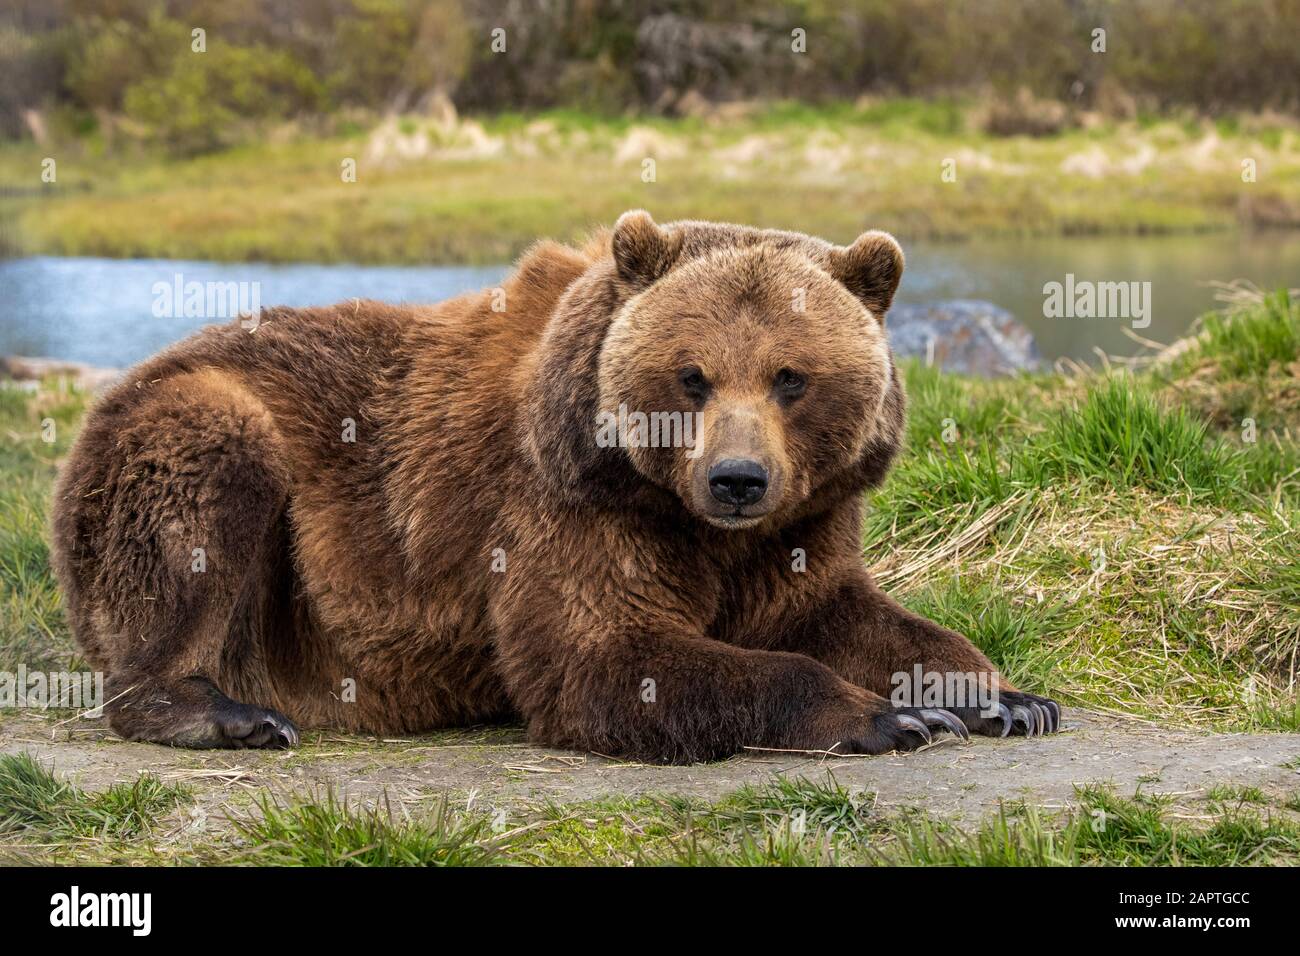 Brown bear (Ursus arctos) sow lying down on grass and looking at the camera, Alaska Wildlife Conservation Centre, South-central Alaska Stock Photo